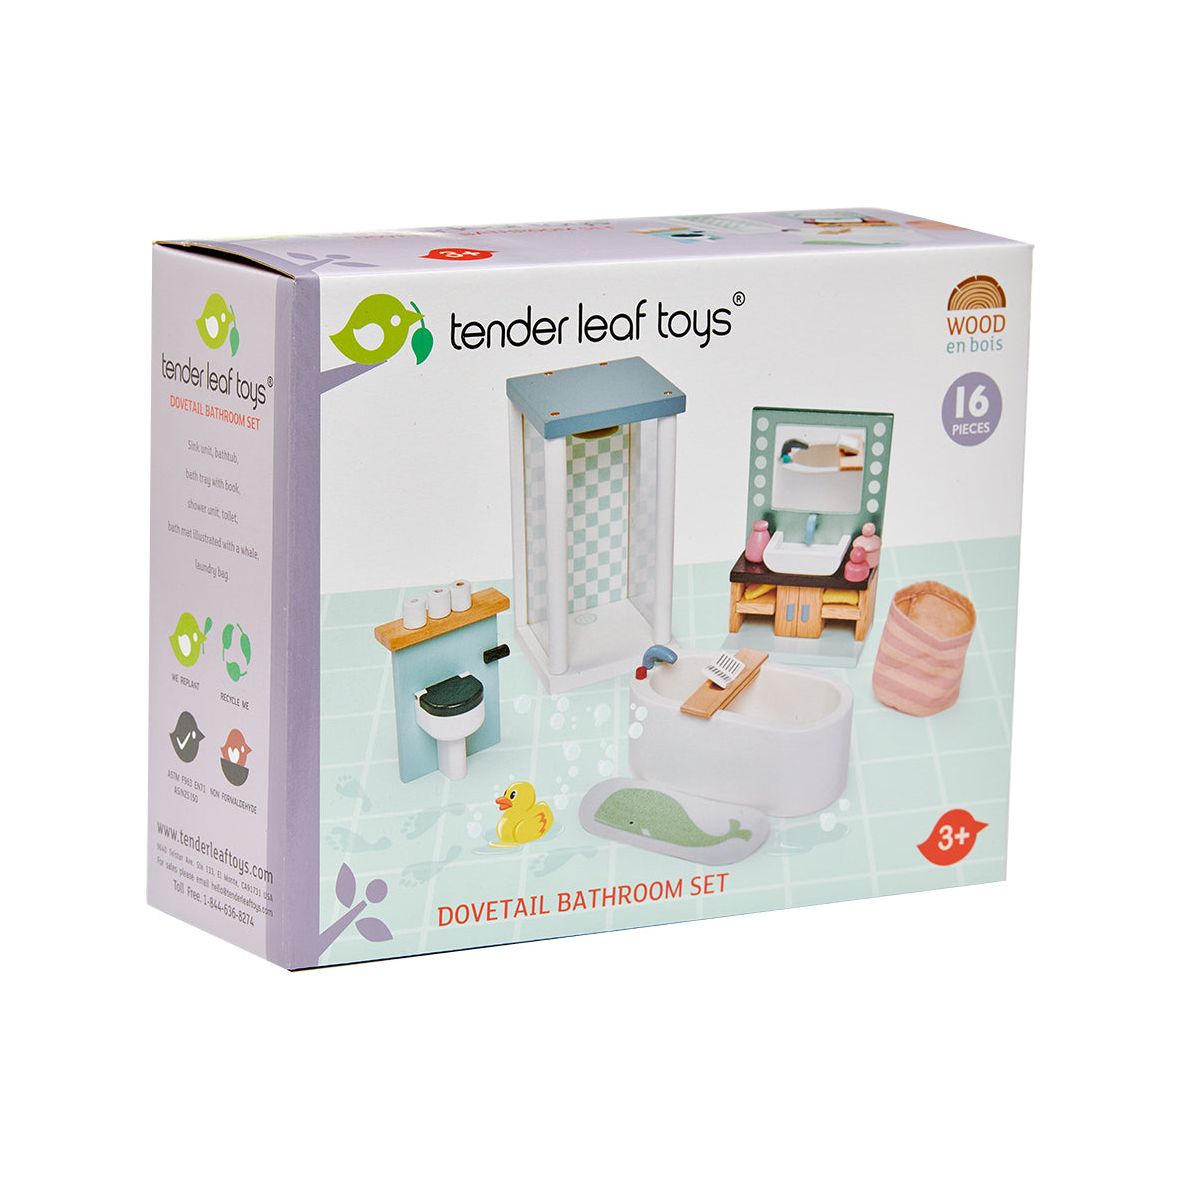 Dolls House Bathroom Furniture - The Online Toy Shop - Dollhouse Accessories - 3